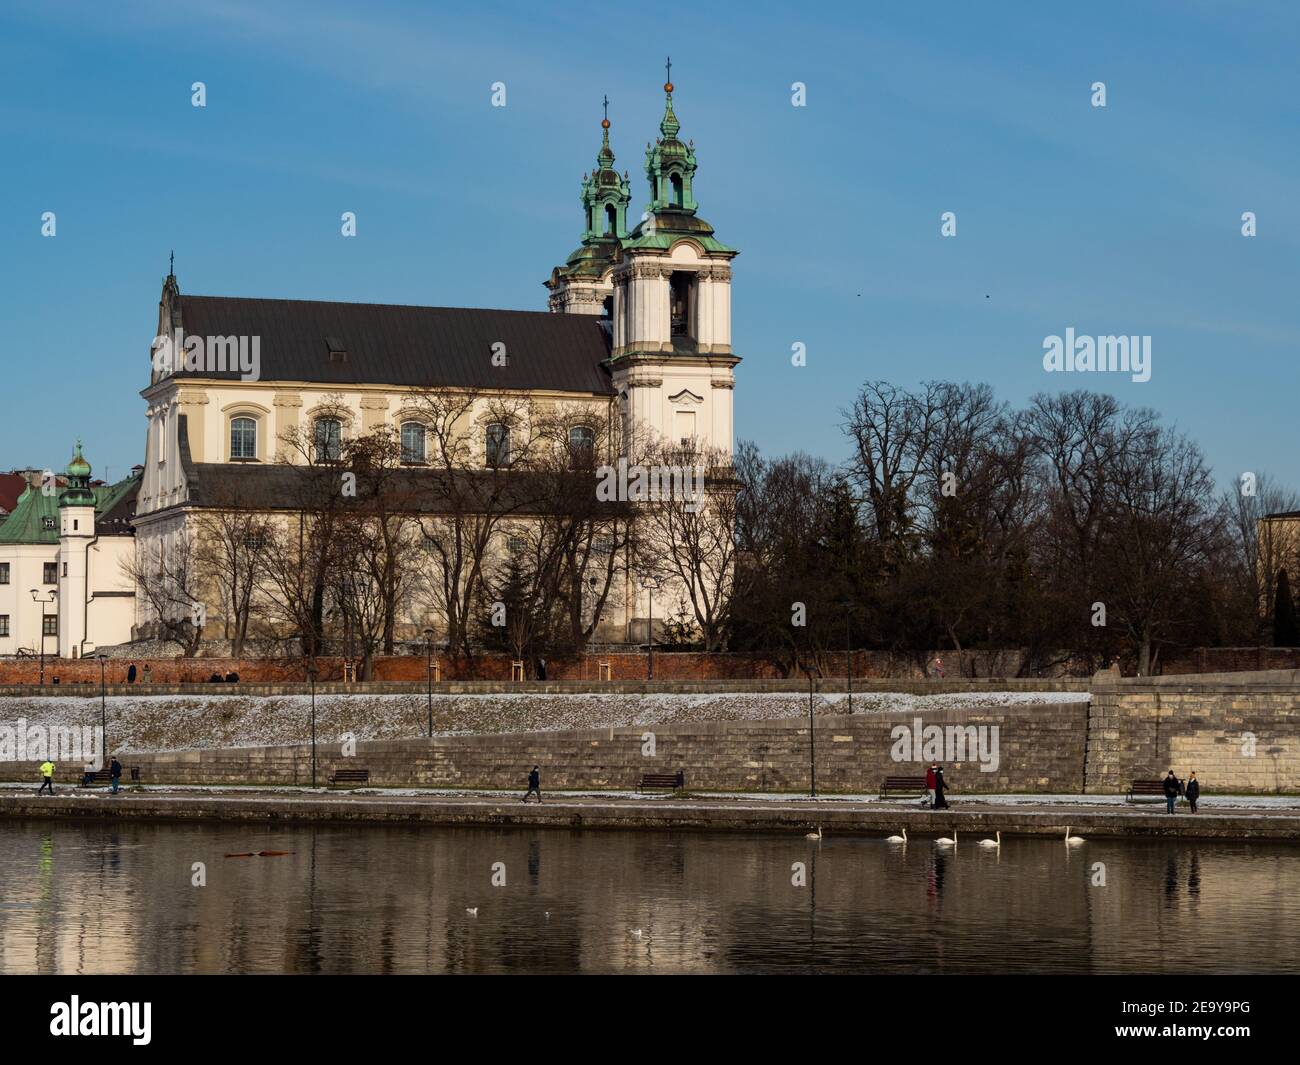 31/01/2021 - Poland/Cracow - view over Vistula Riverbanks and St. Michael the Archangel and St. Stanisław Church. Winter time. Stock Photo